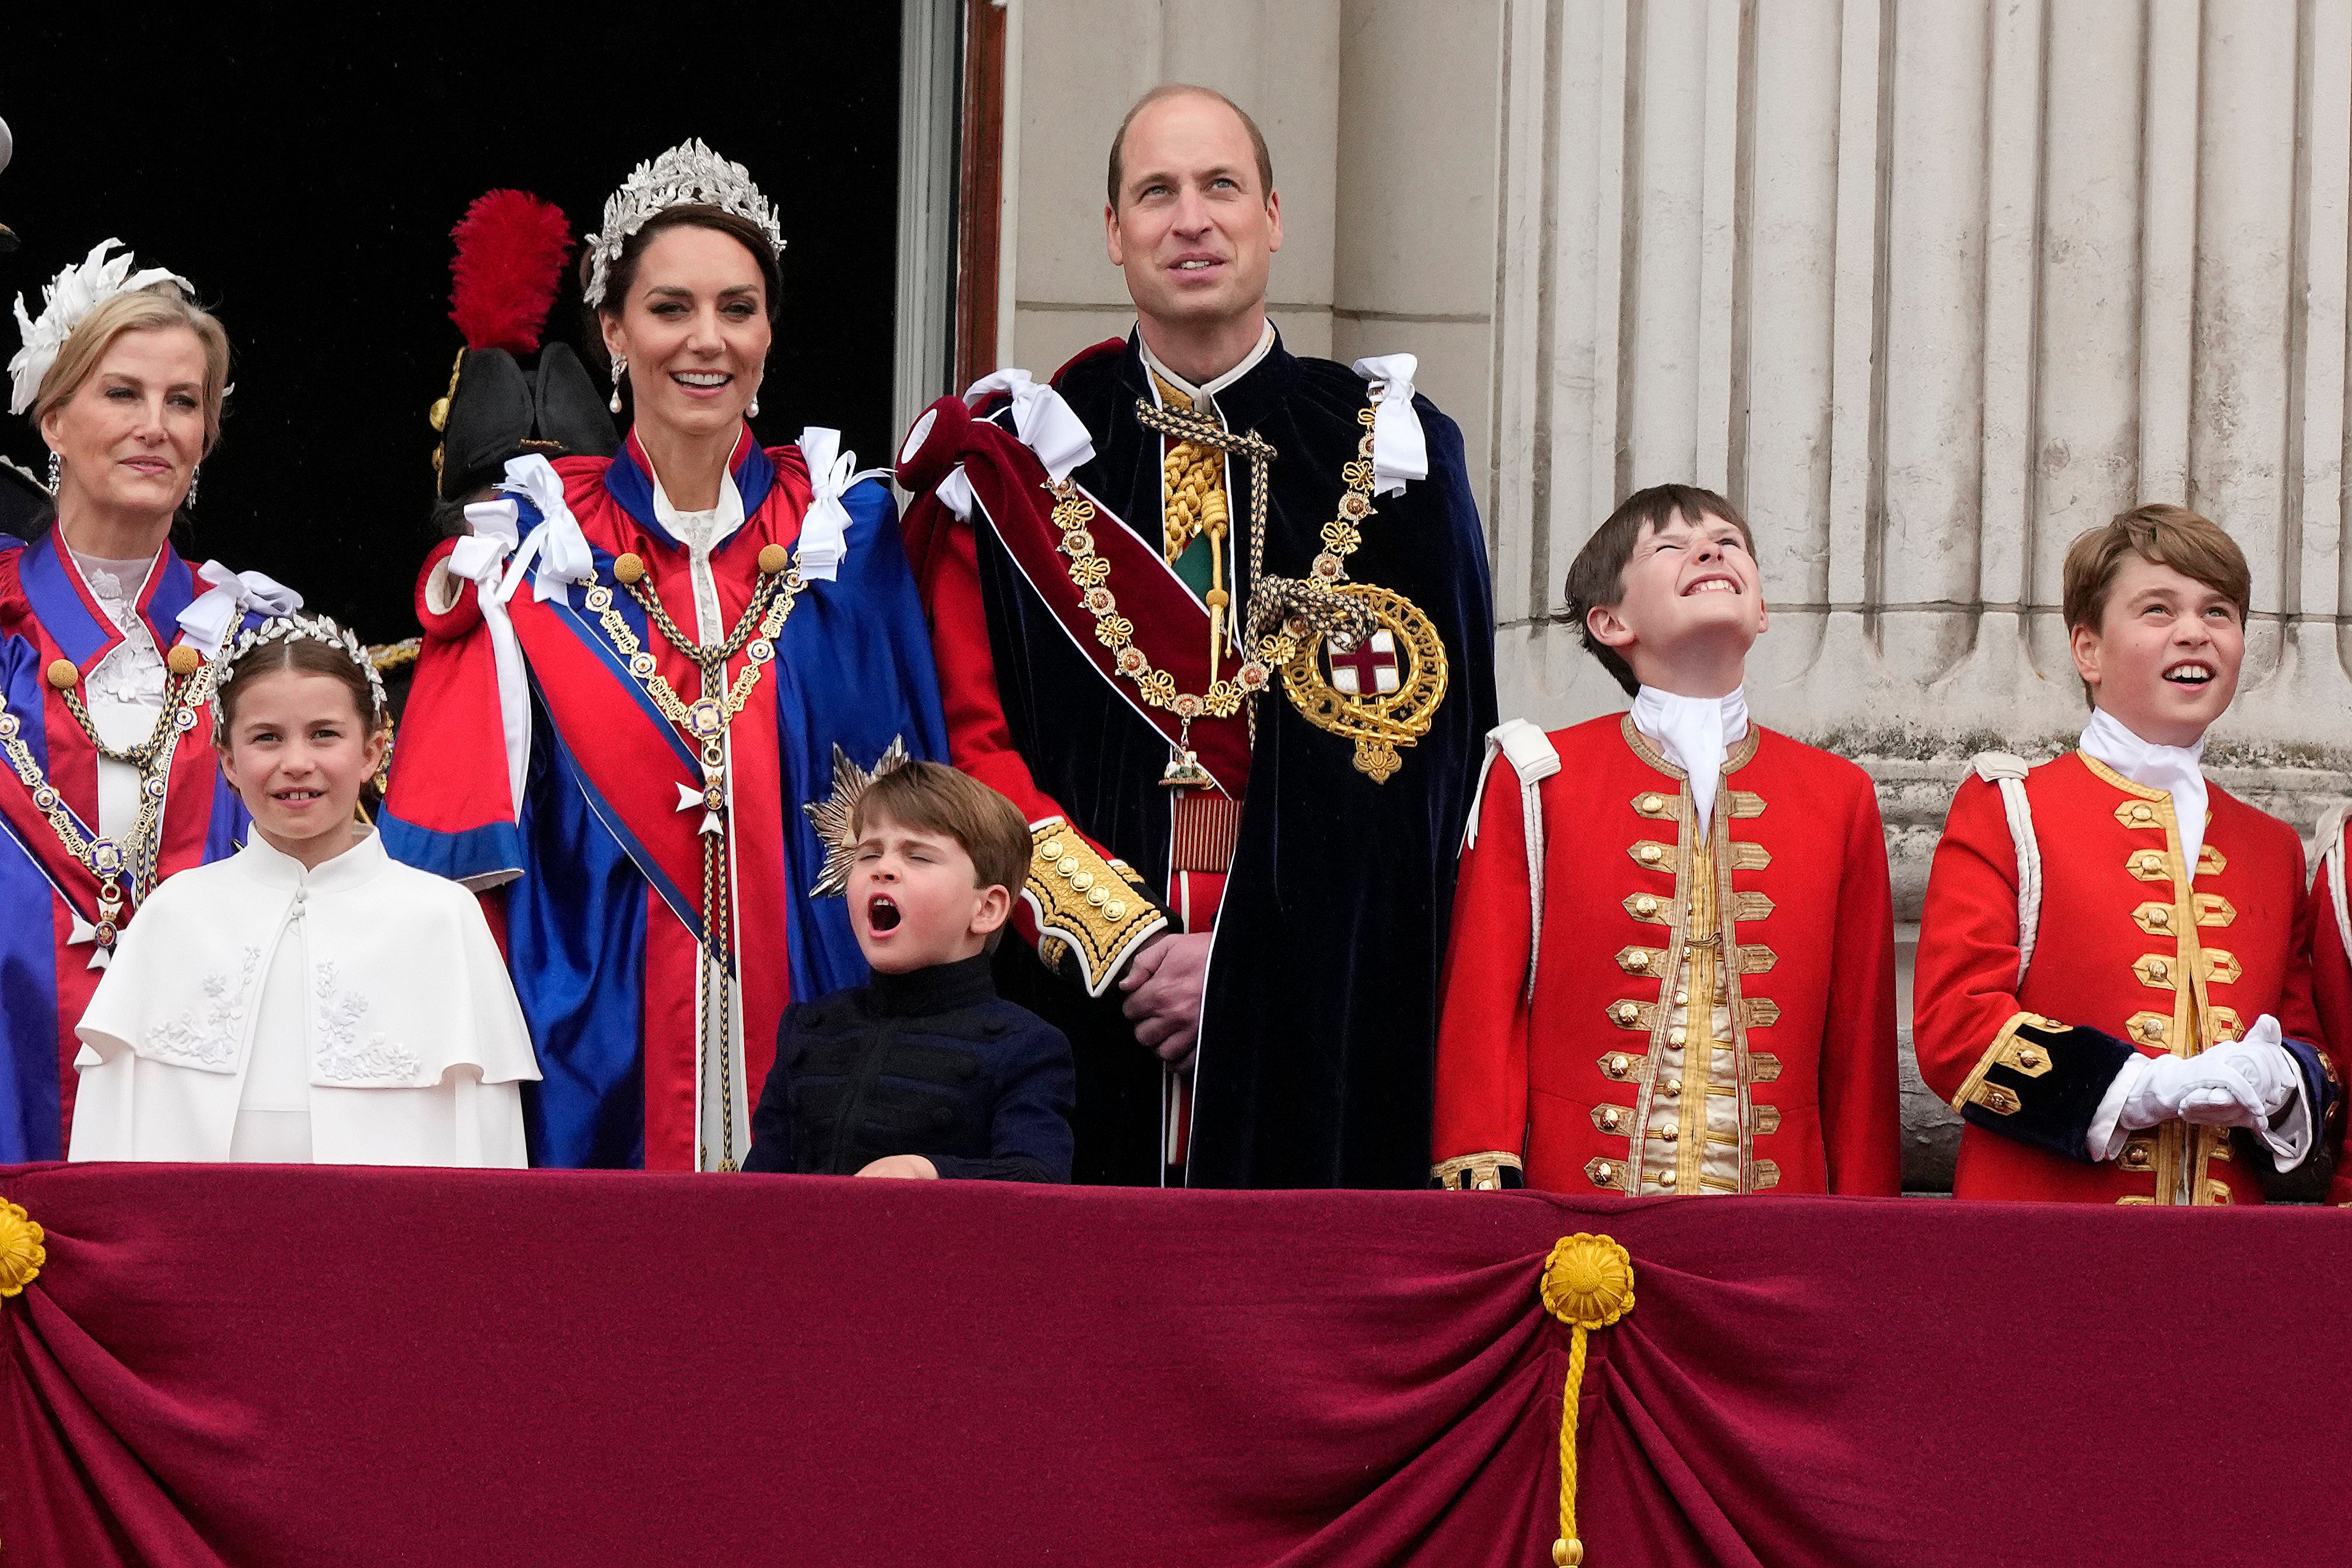 Prince William and his family – Princess Charlotte, Kate Middleton, Prince Louis and Prince George – are sitting pretty as the next royals in line to the throne, but could the institution be abolished before they get there? Photo: AP